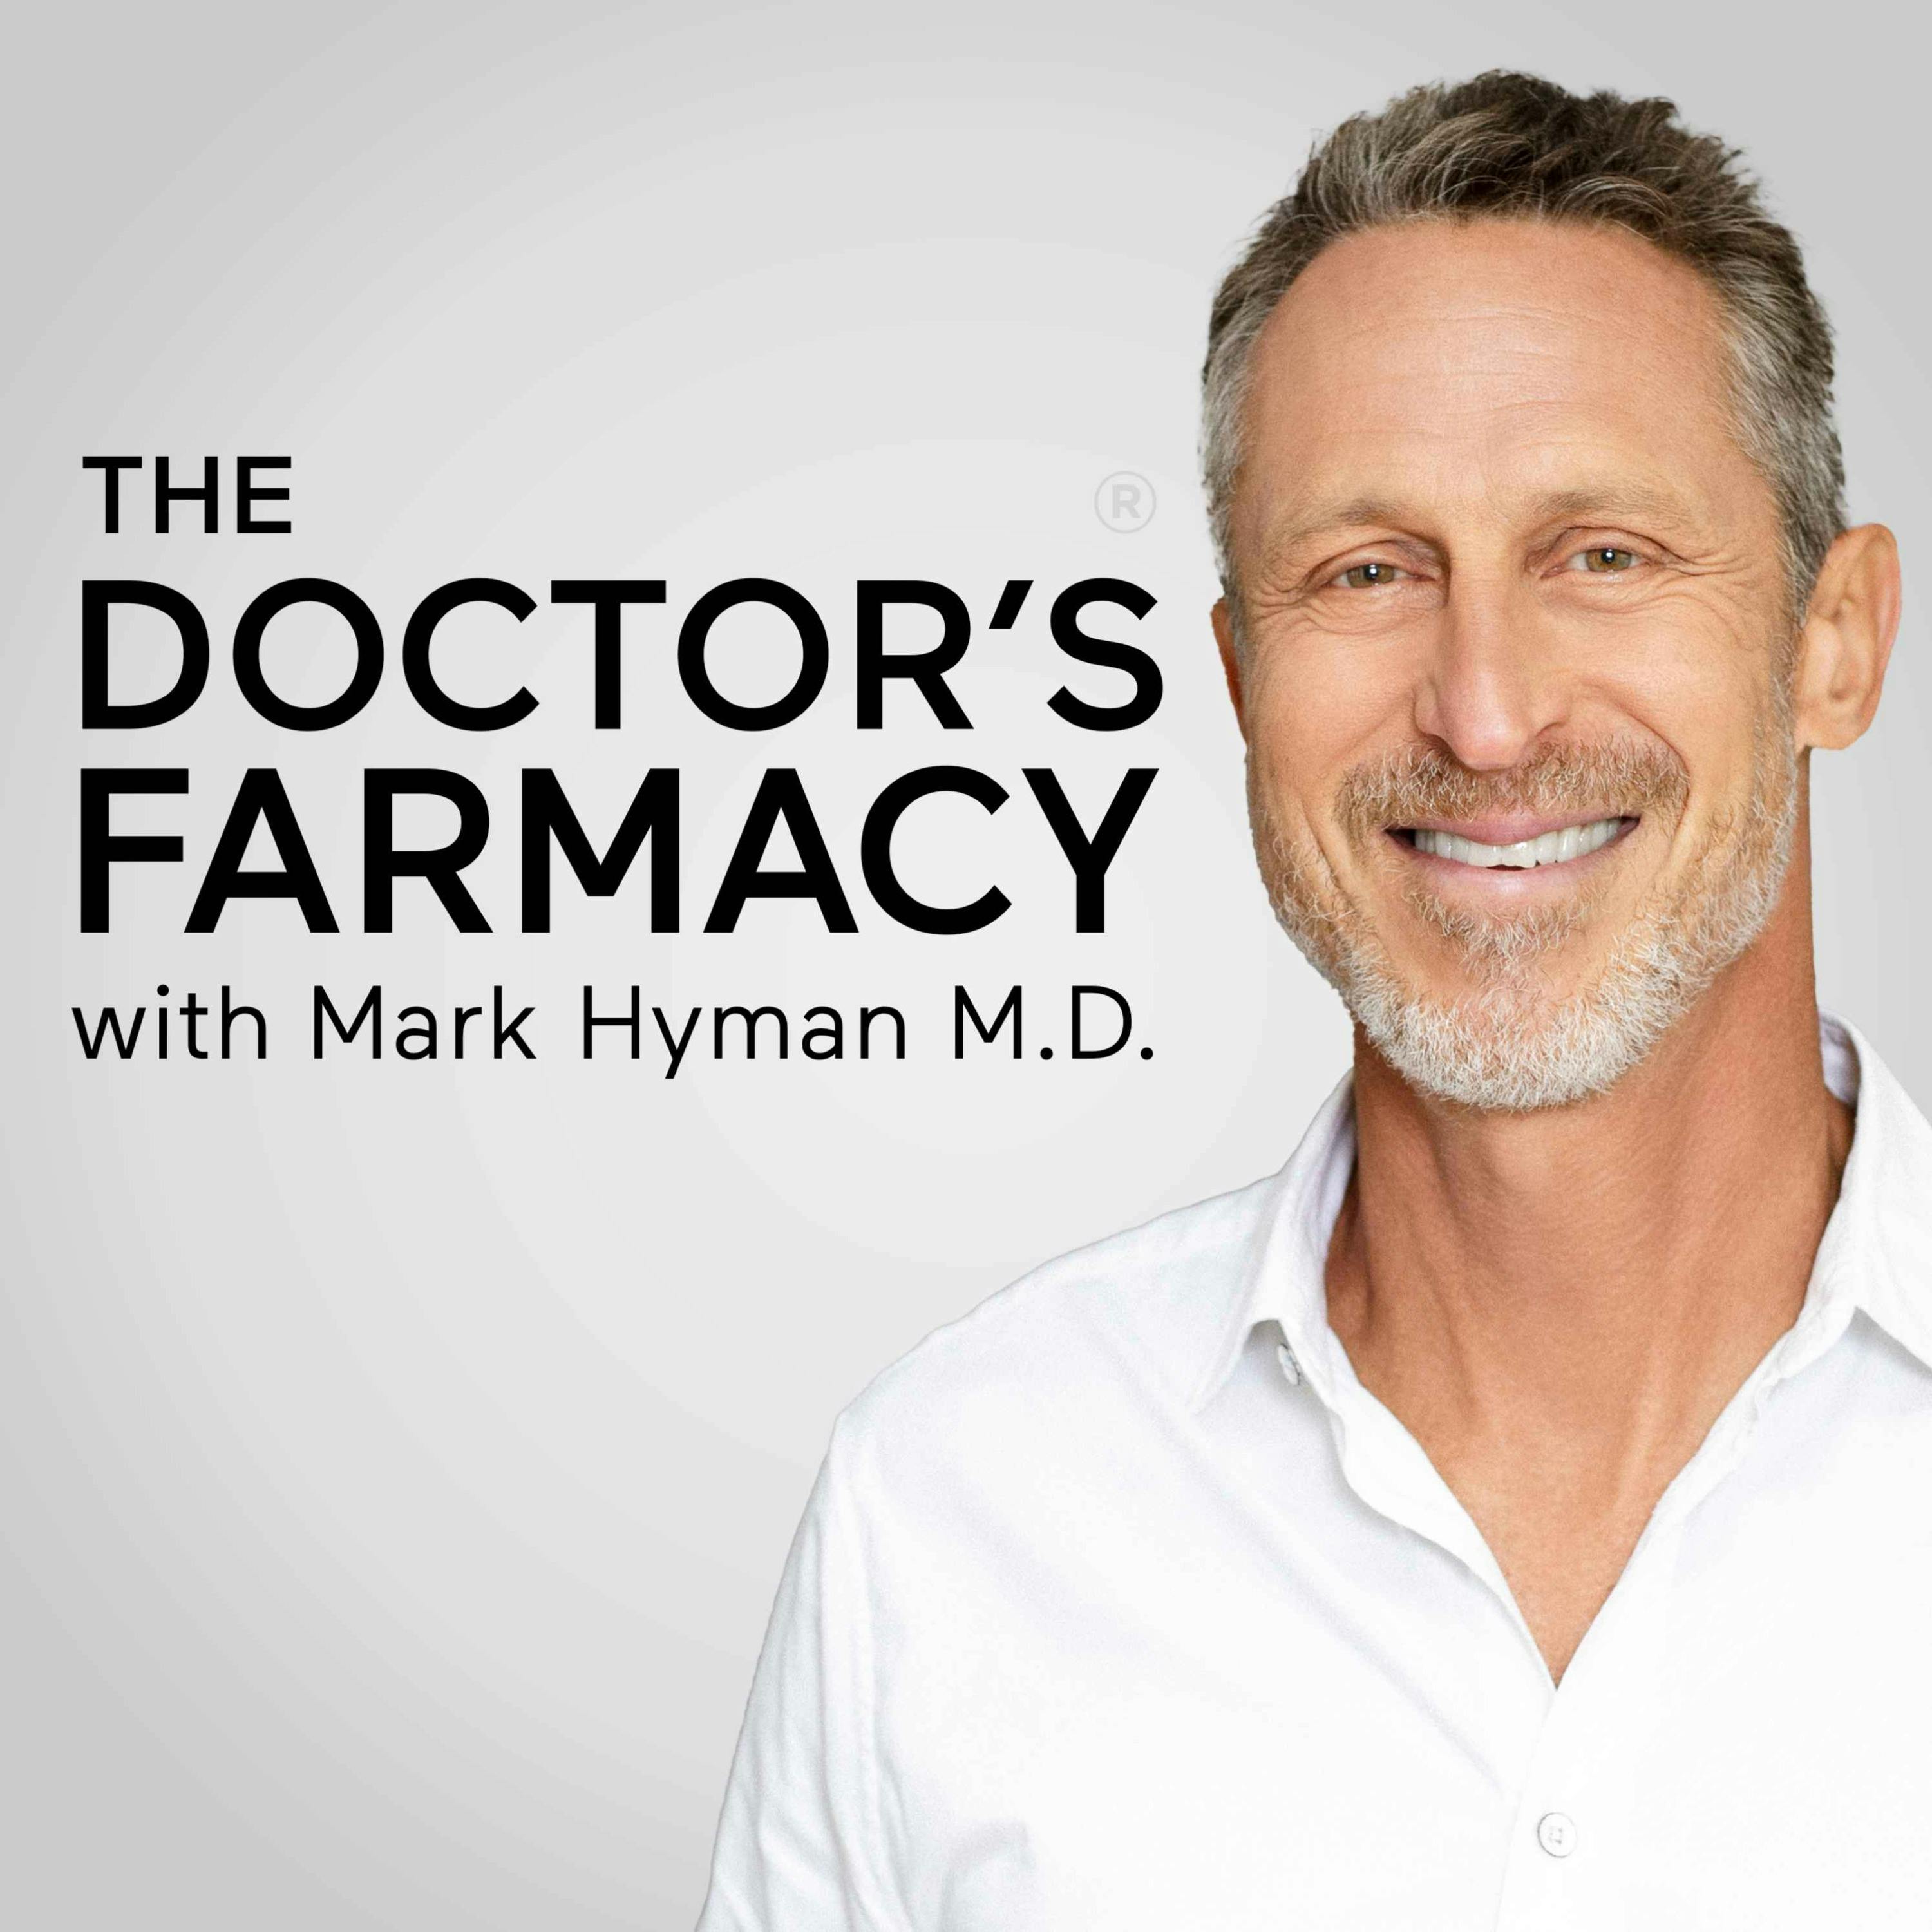 Food: The Root Causes of Our Healthcare, Economic and Social Crises with Robert F. Kennedy Jr.